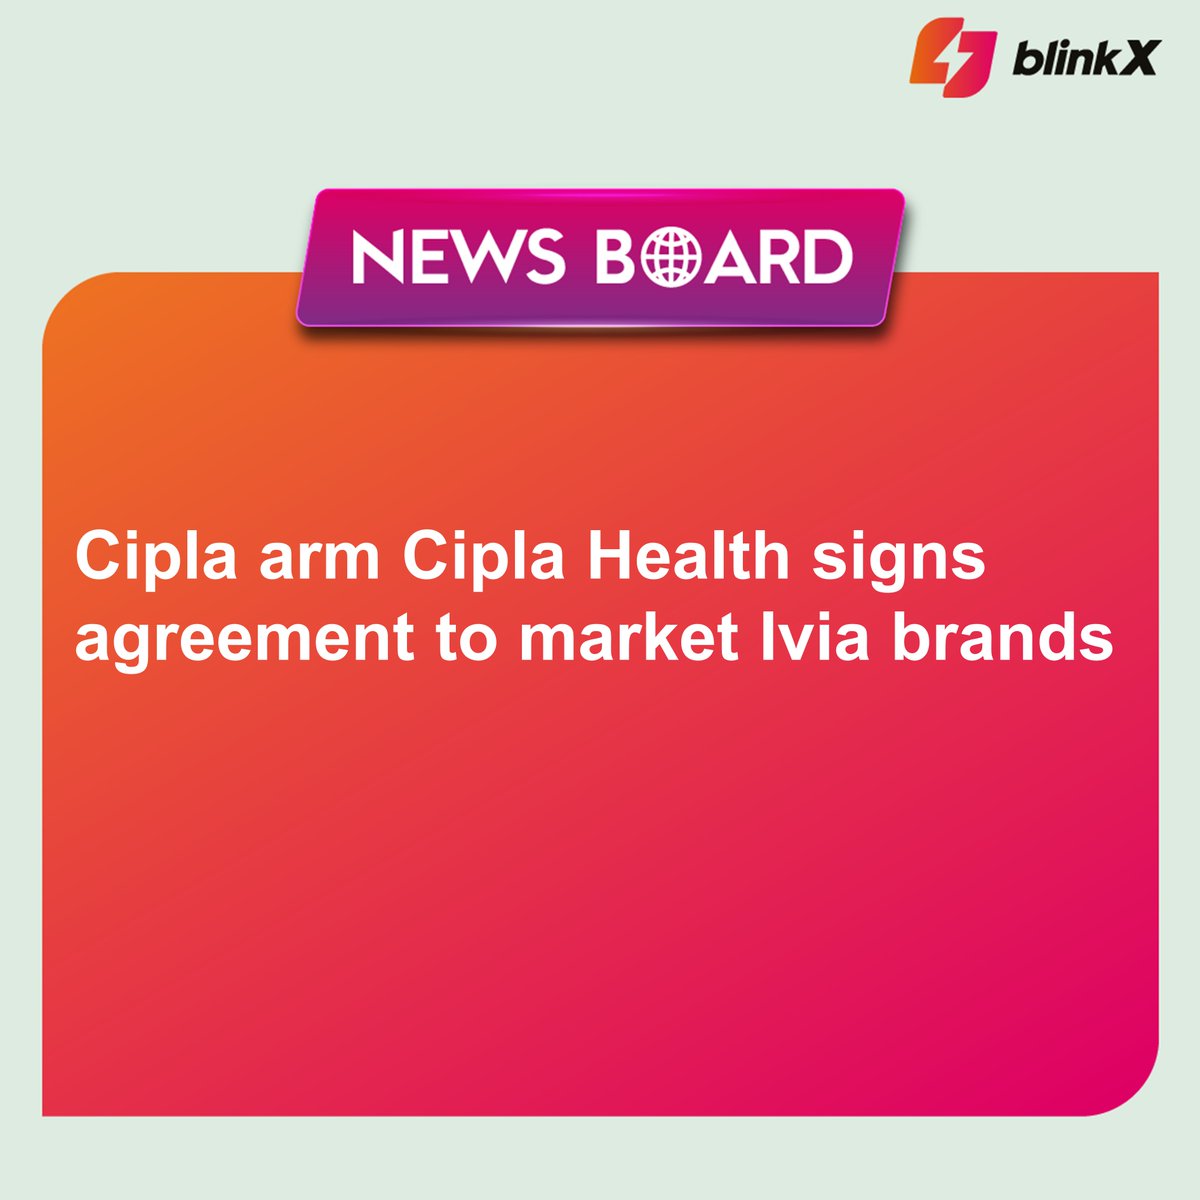 This strategic move is aligned with Cipla’s focus on enhancing its consumer healthcare and wellness portfolio, the company said in a statement.

#Cipla #agreement #CiplaHealth #Ivia #beauty #Brands #cosmetics #health #healthcare #pharma #deals #project #company #stocks…